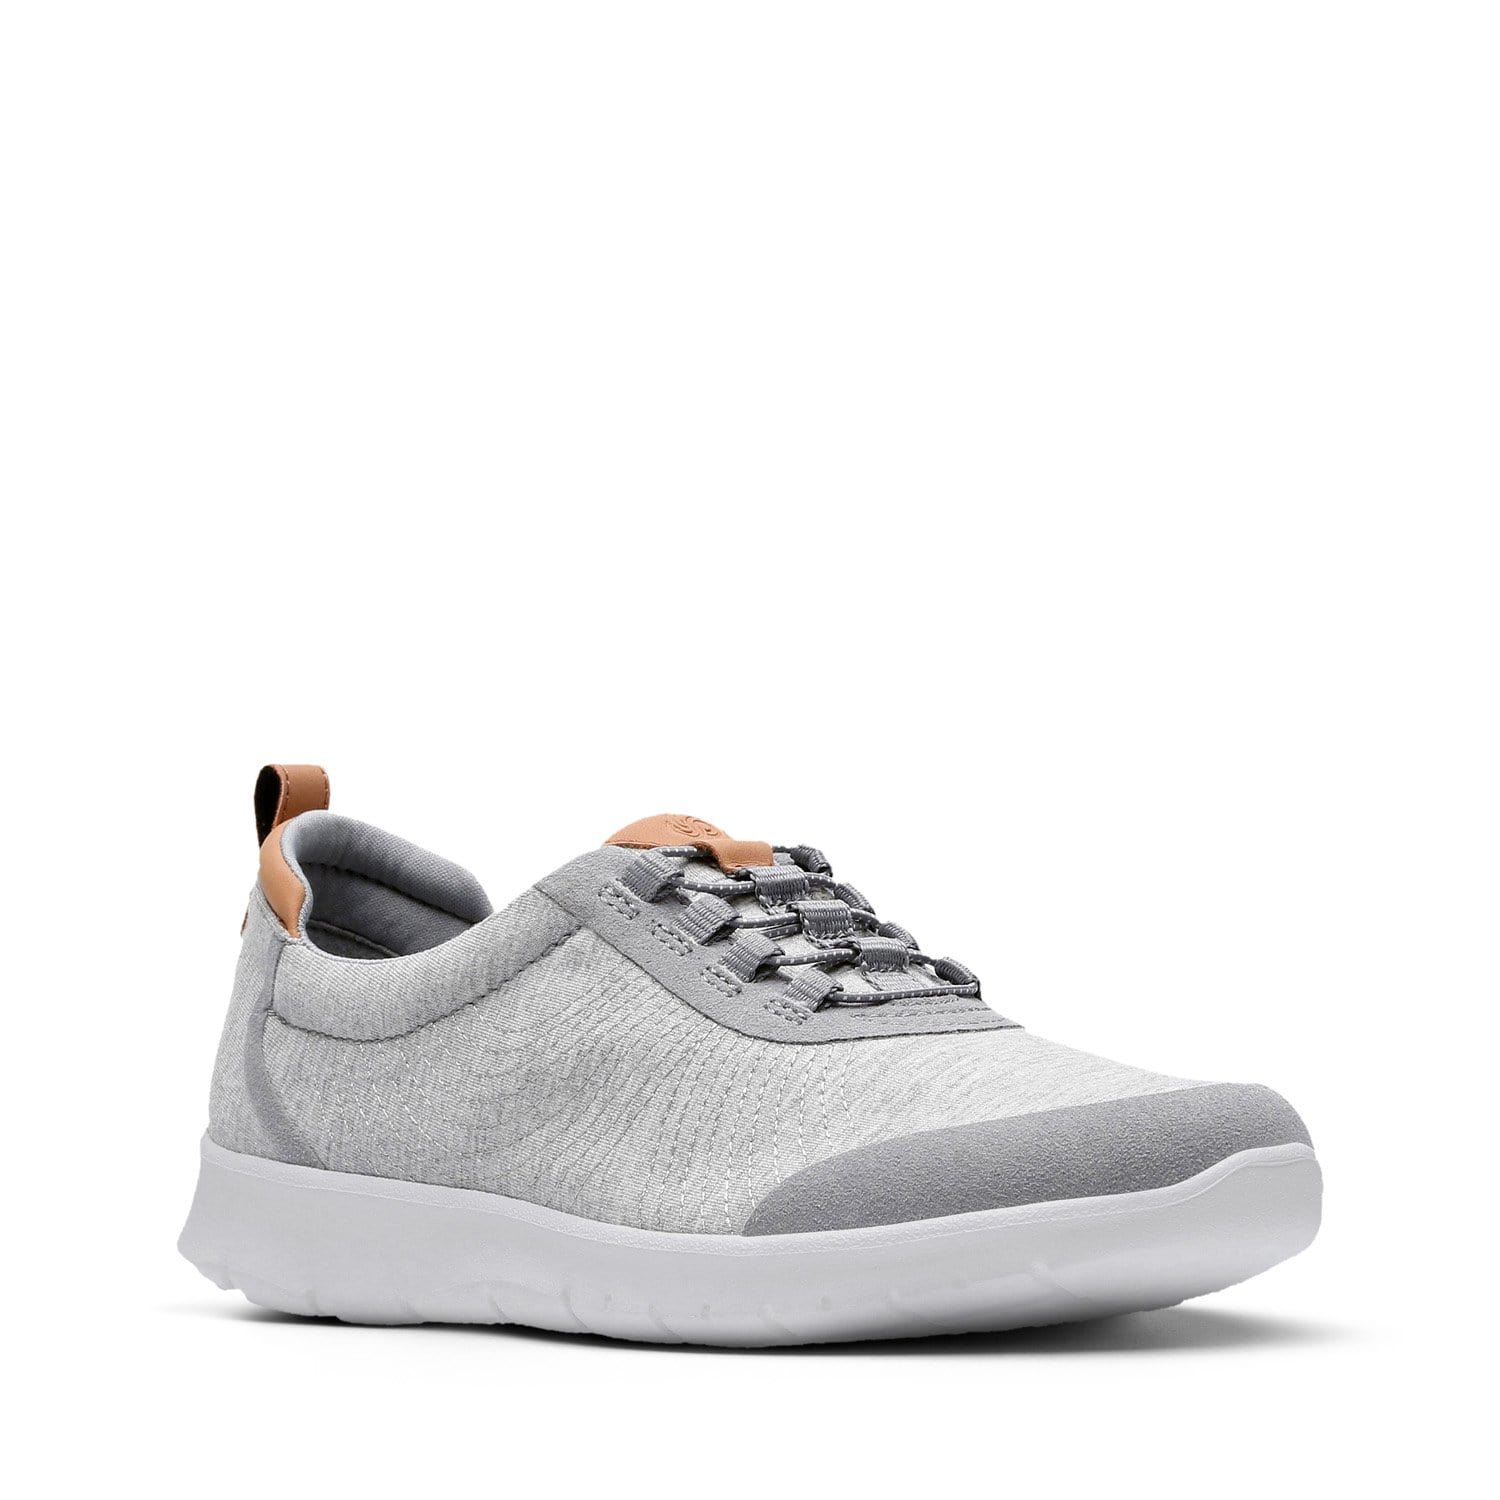 clarks-step-allenabay-slip-ons-grey-heathered-fabric-26134181-d-width-standard-fit